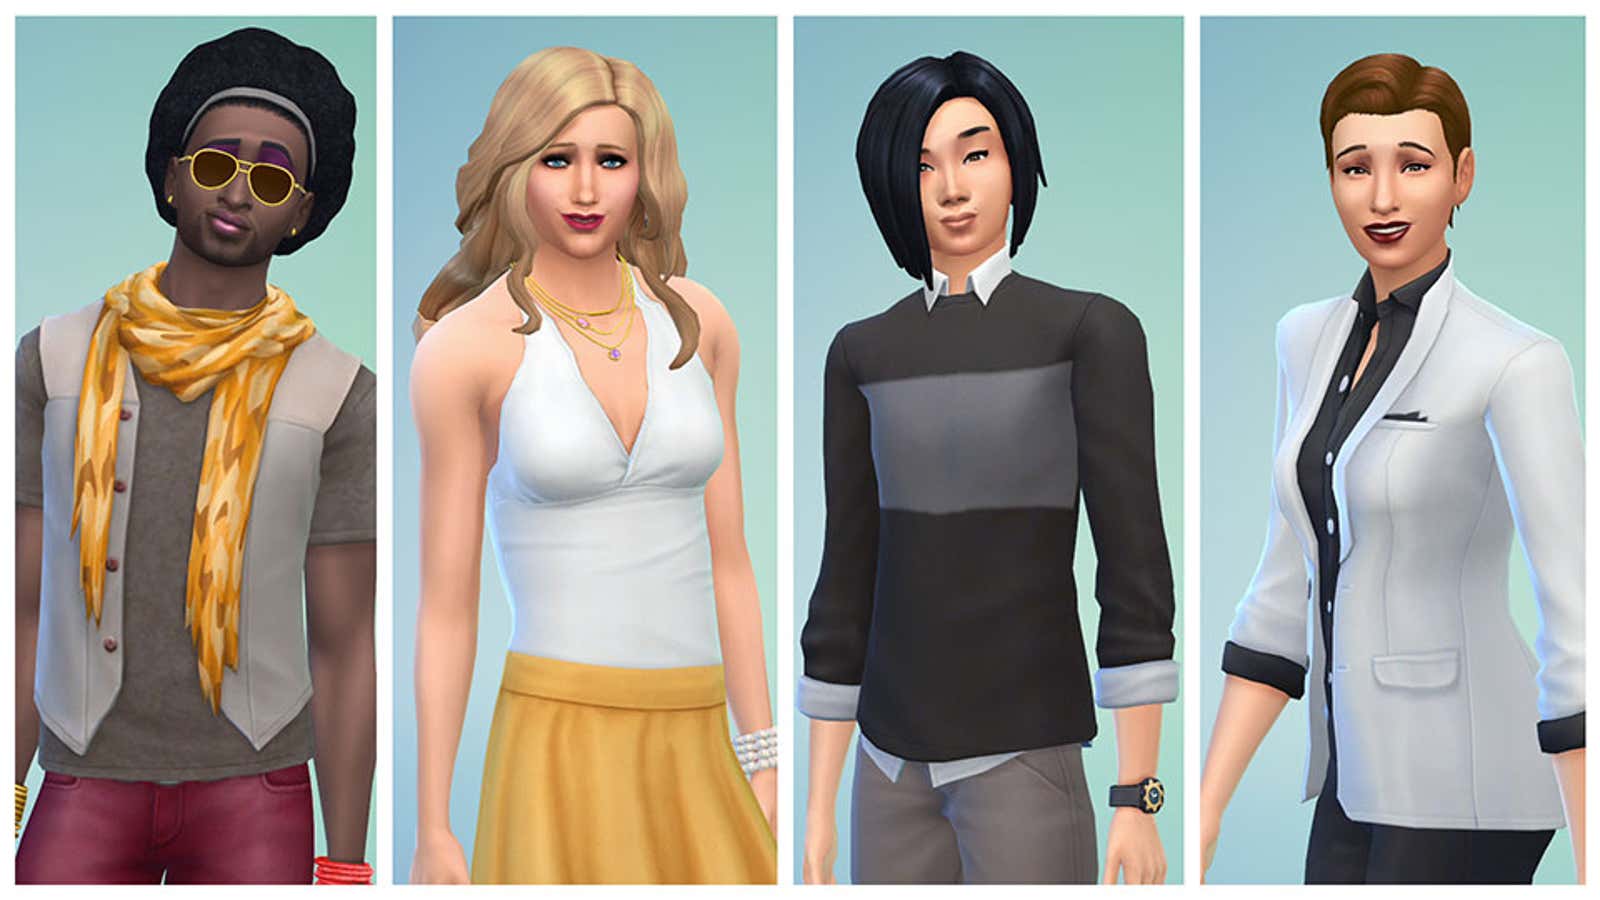 You can dress your Sim how you like now, regardless of its gender.